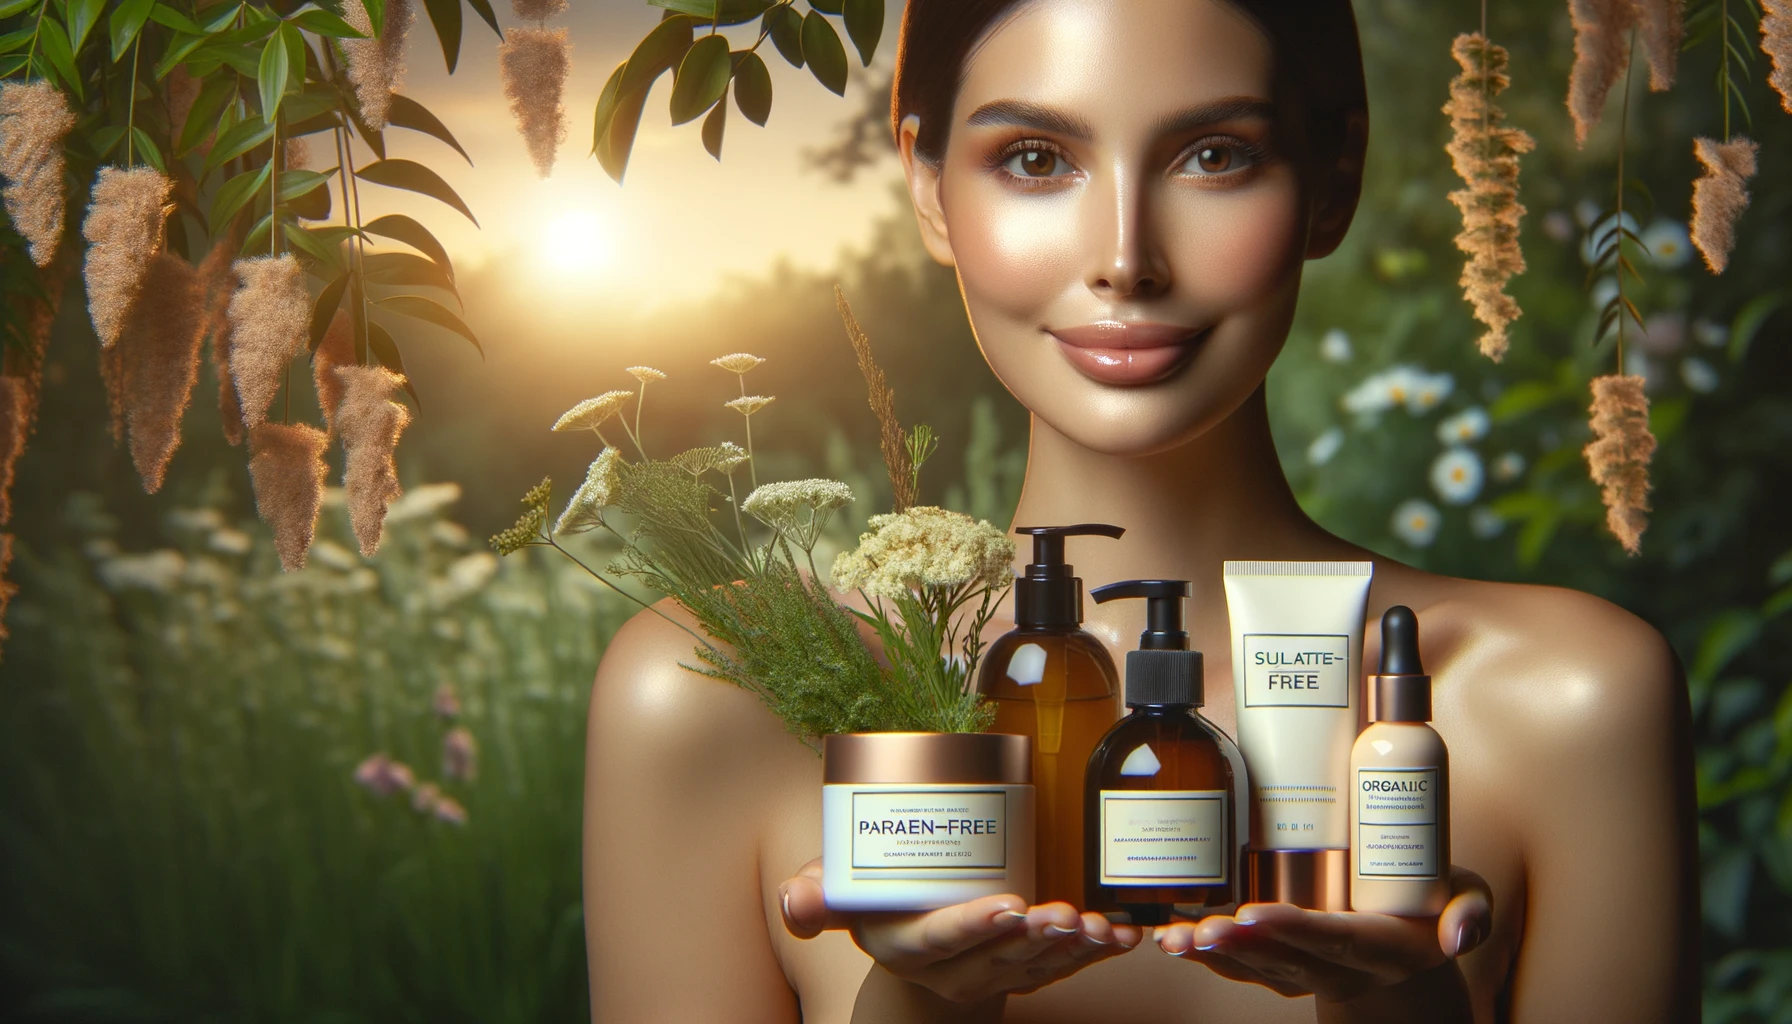 Woman showcasing natural beauty products in an eco-friendly setting; illustration of radiant skin and plant-based makeup.